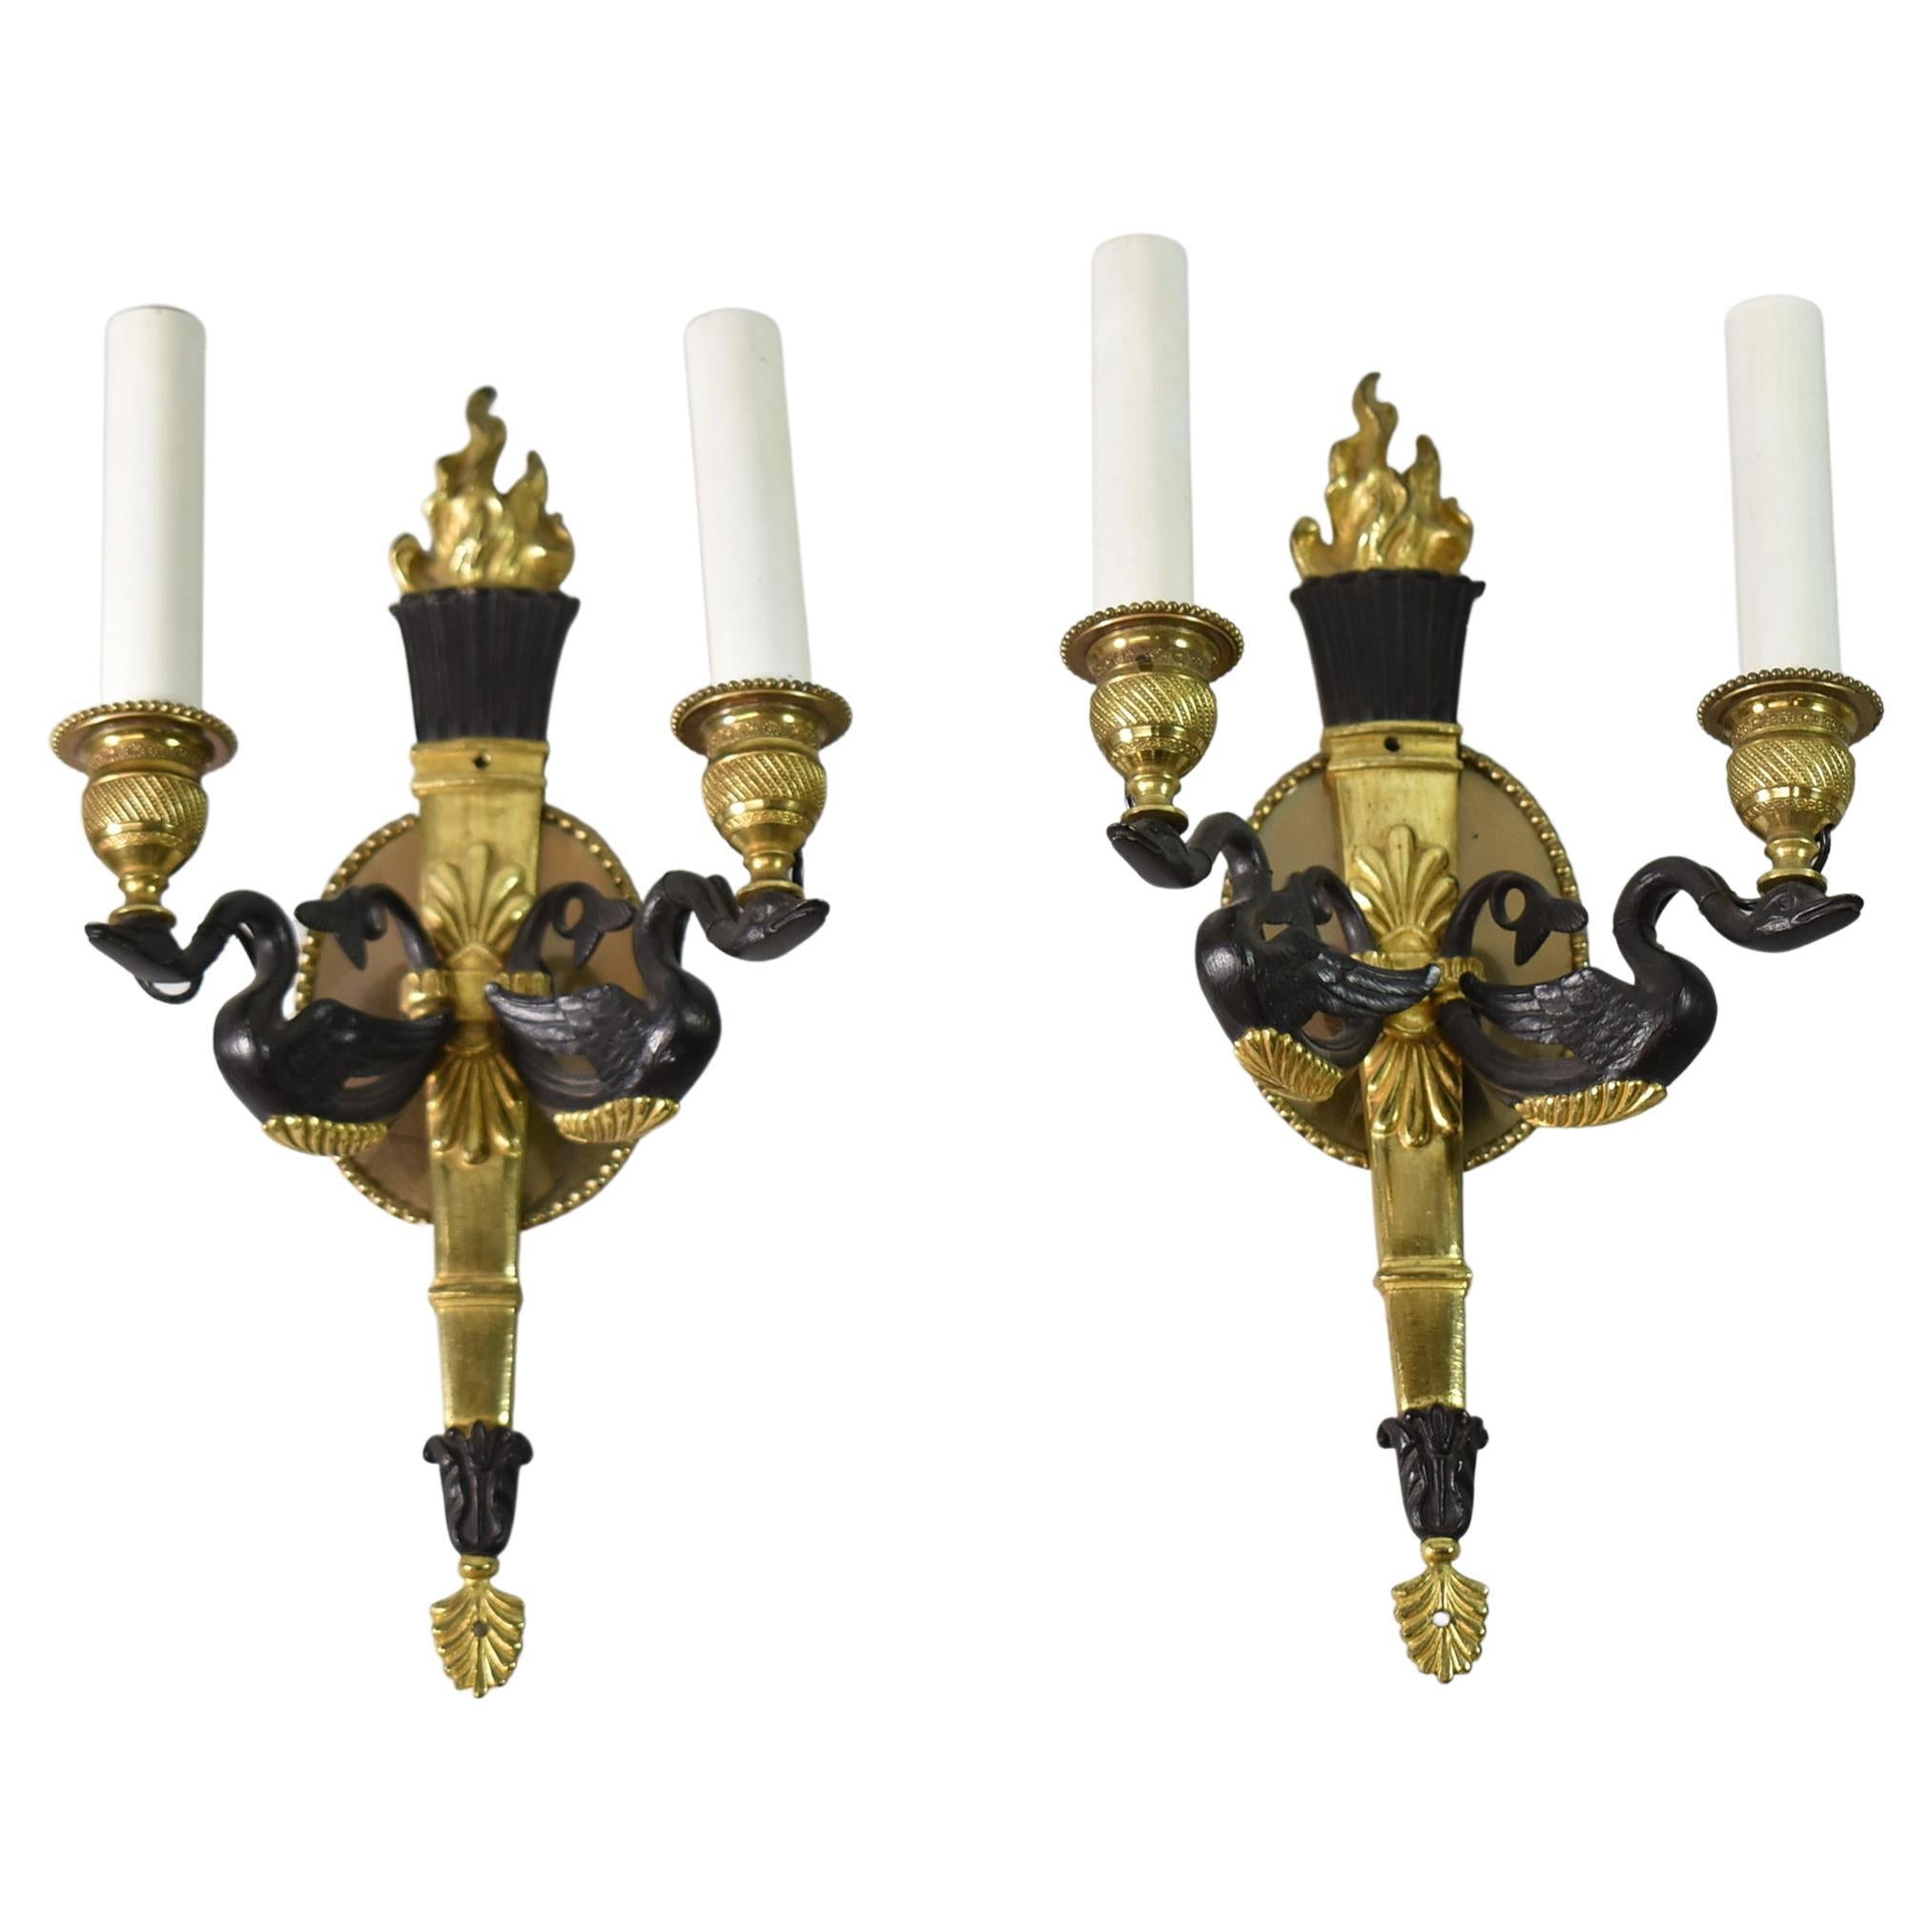 Vintage French Sconces Antique Pair Swan Shaped Wall Lamps